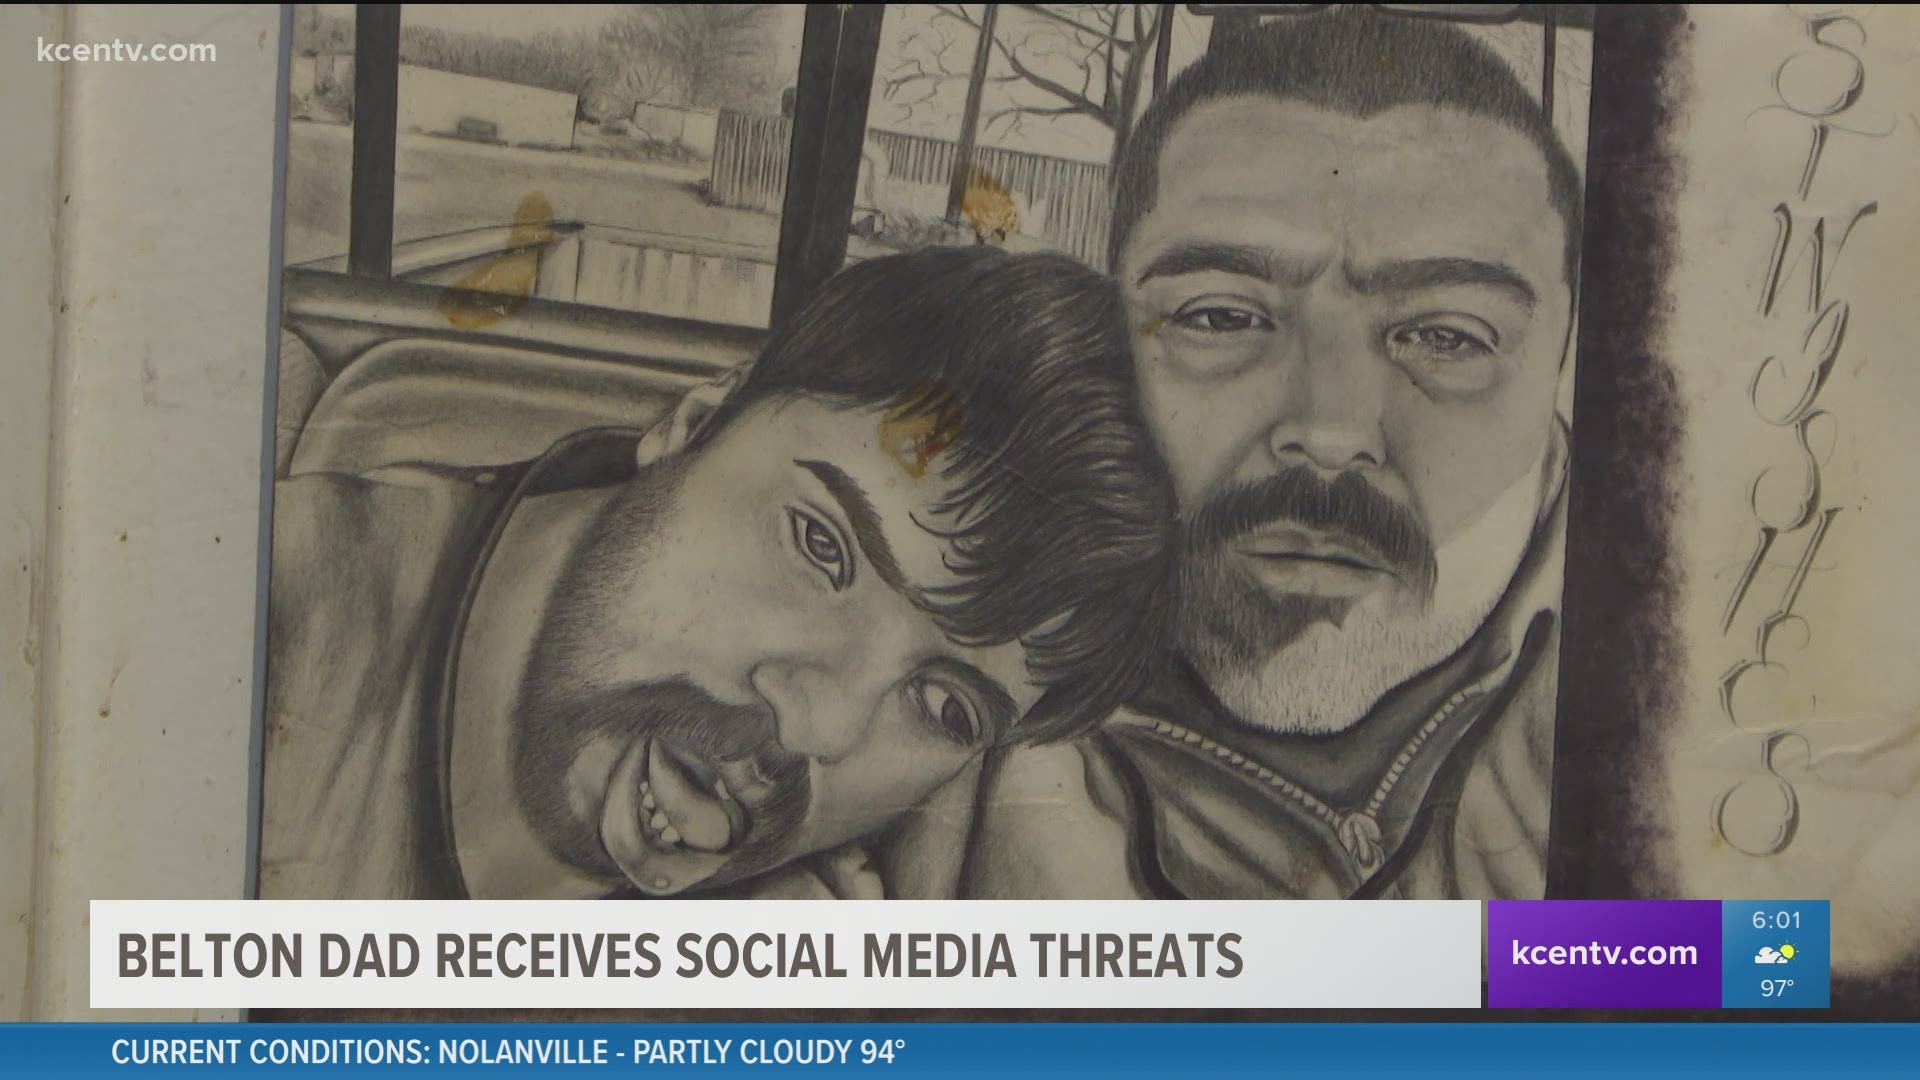 Marty Mendoza said he and his son, Marty, Jr., been receiving death threats and has been living in fear